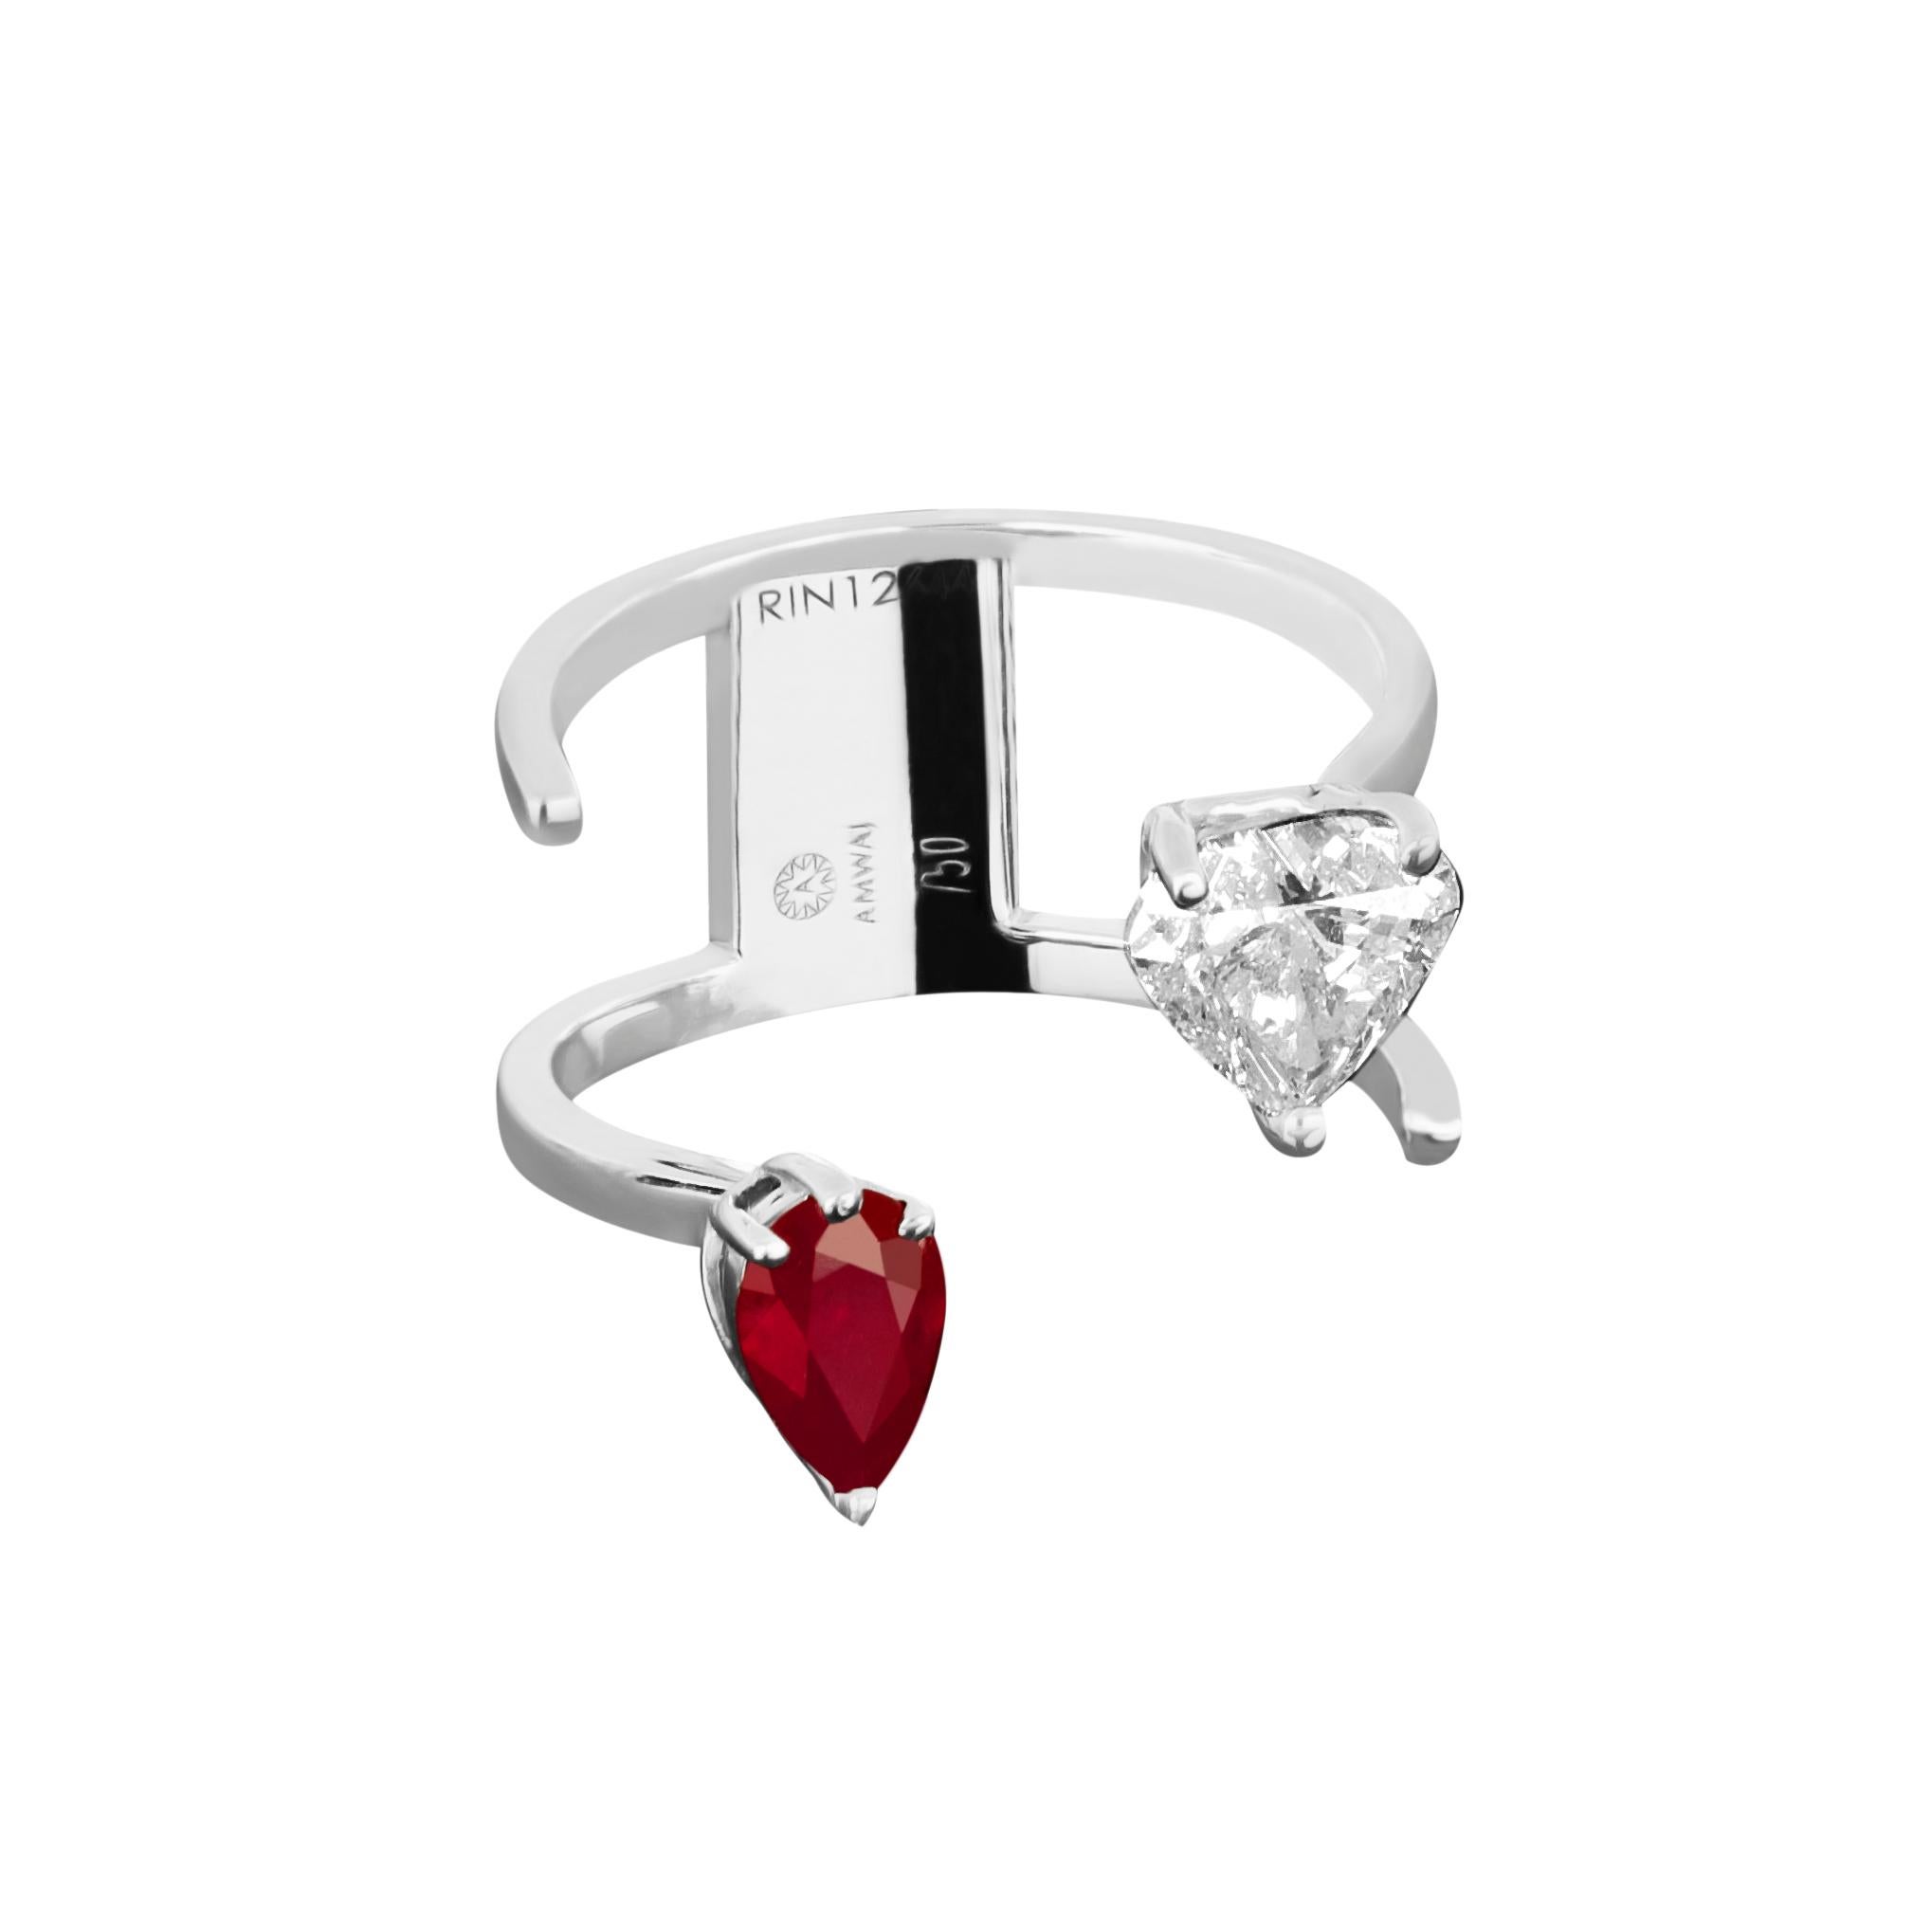 Contemporary Amwaj Jewellery 18 Karat White Gold Ring with Ruby and Heart Cut Diamond For Sale